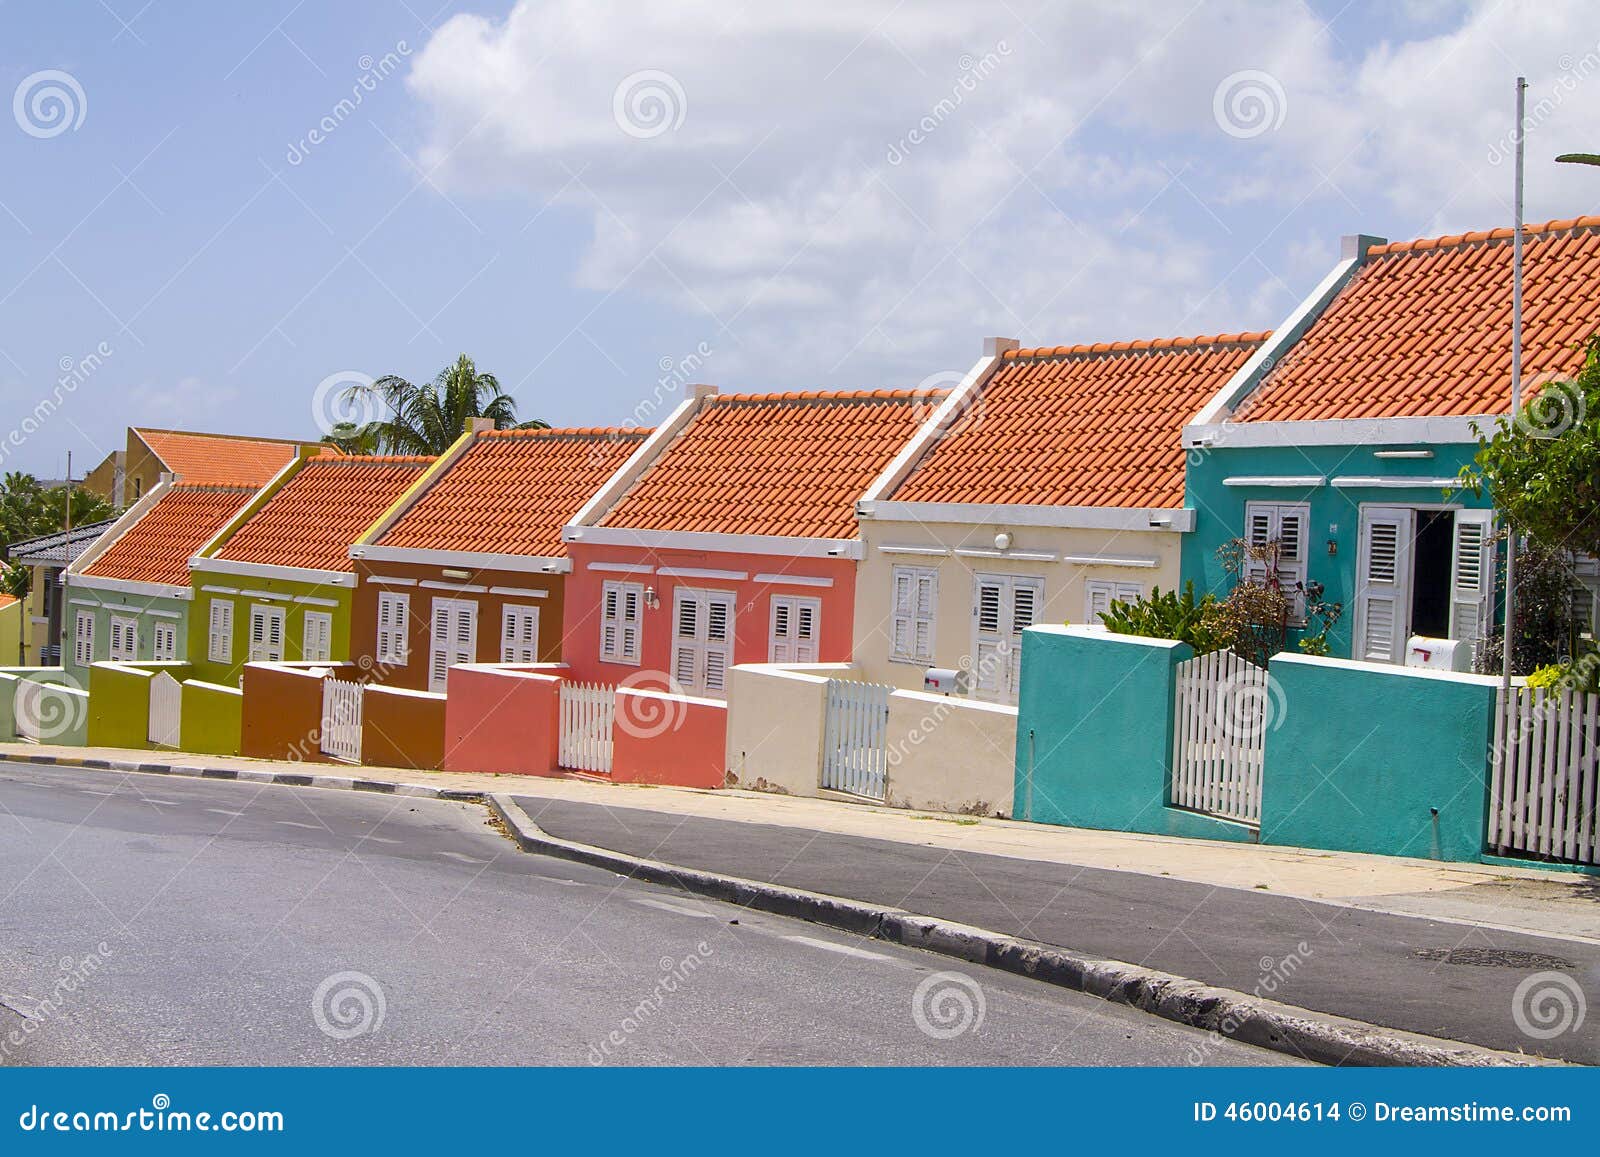 houses willemstad curacao